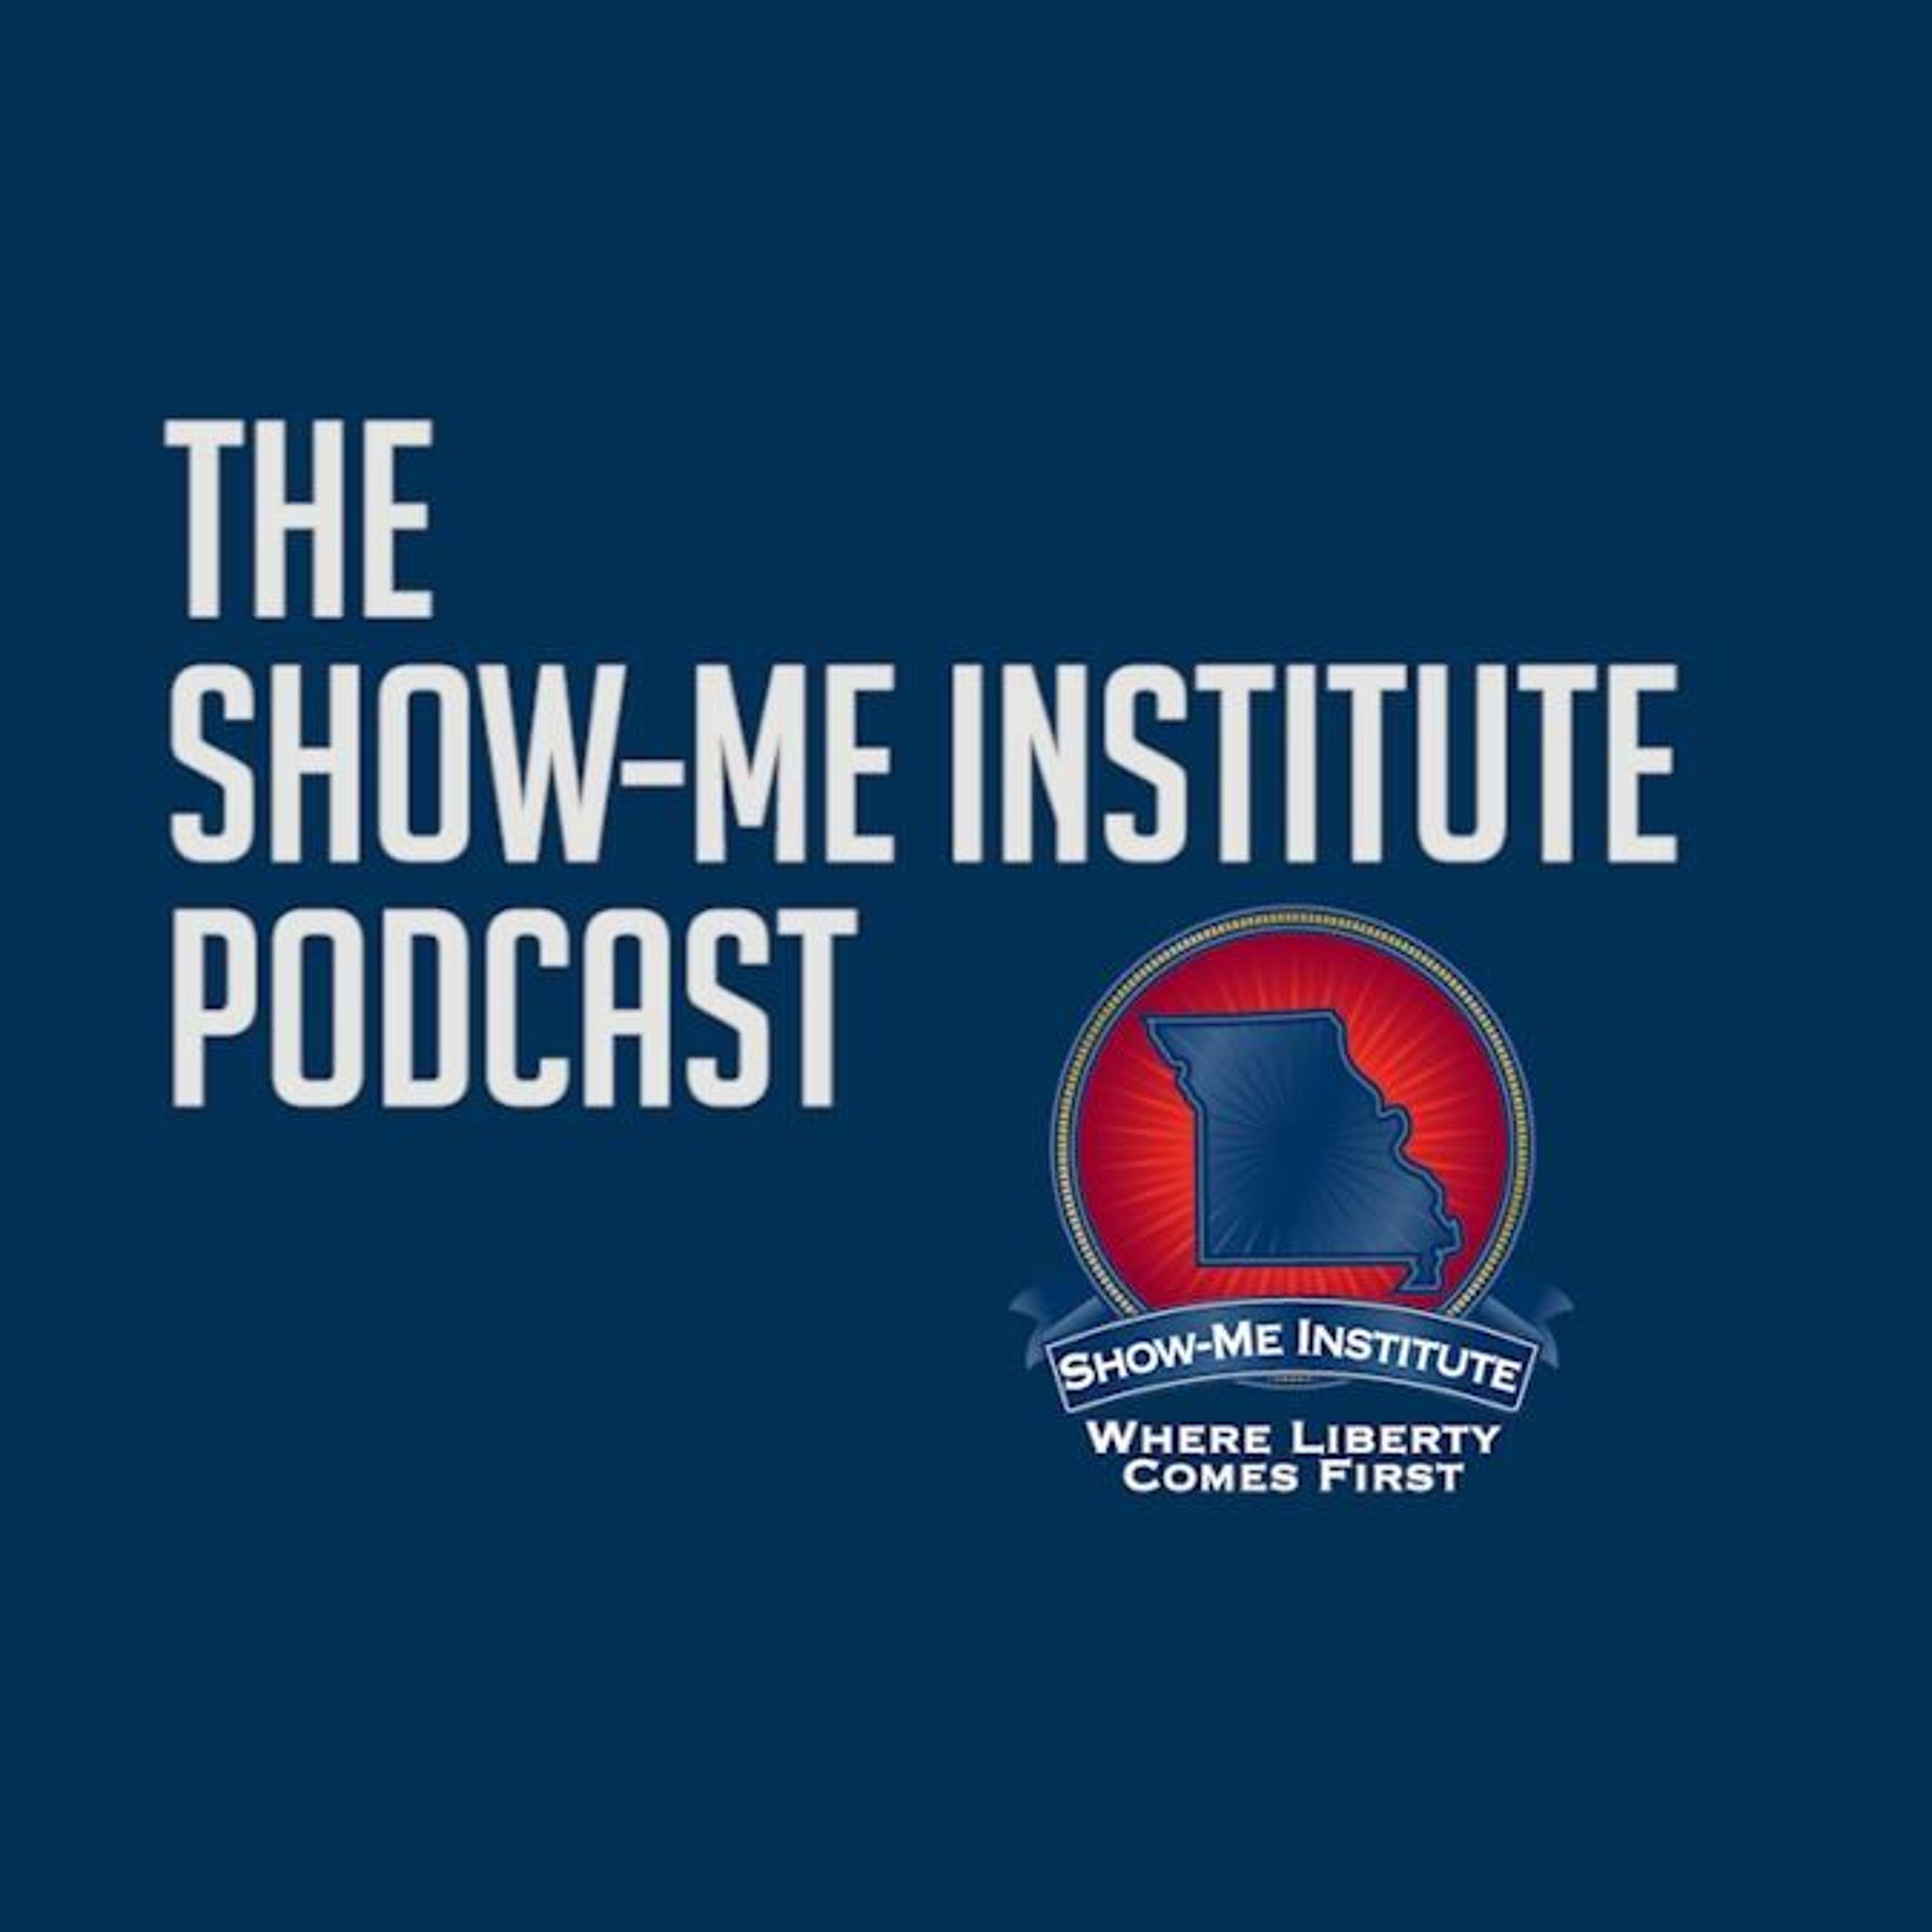 SMI Podcast: Outlawing Homeschooling - Dr. Neal McCluskey